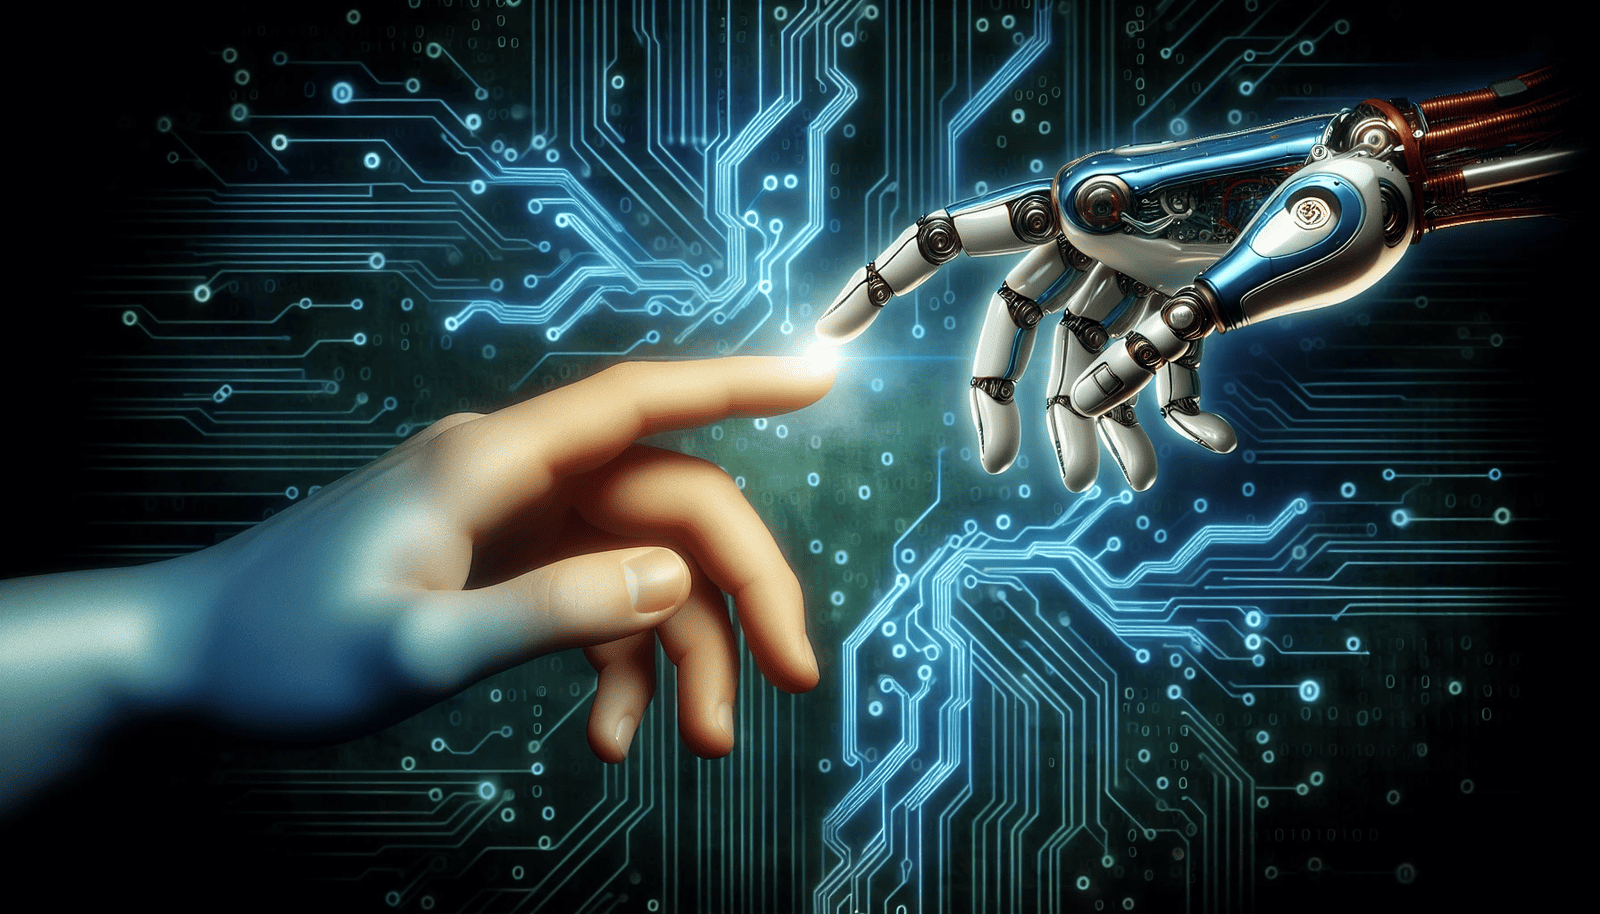 Artificial intelligence concept with human and robot hands reaching towards each other